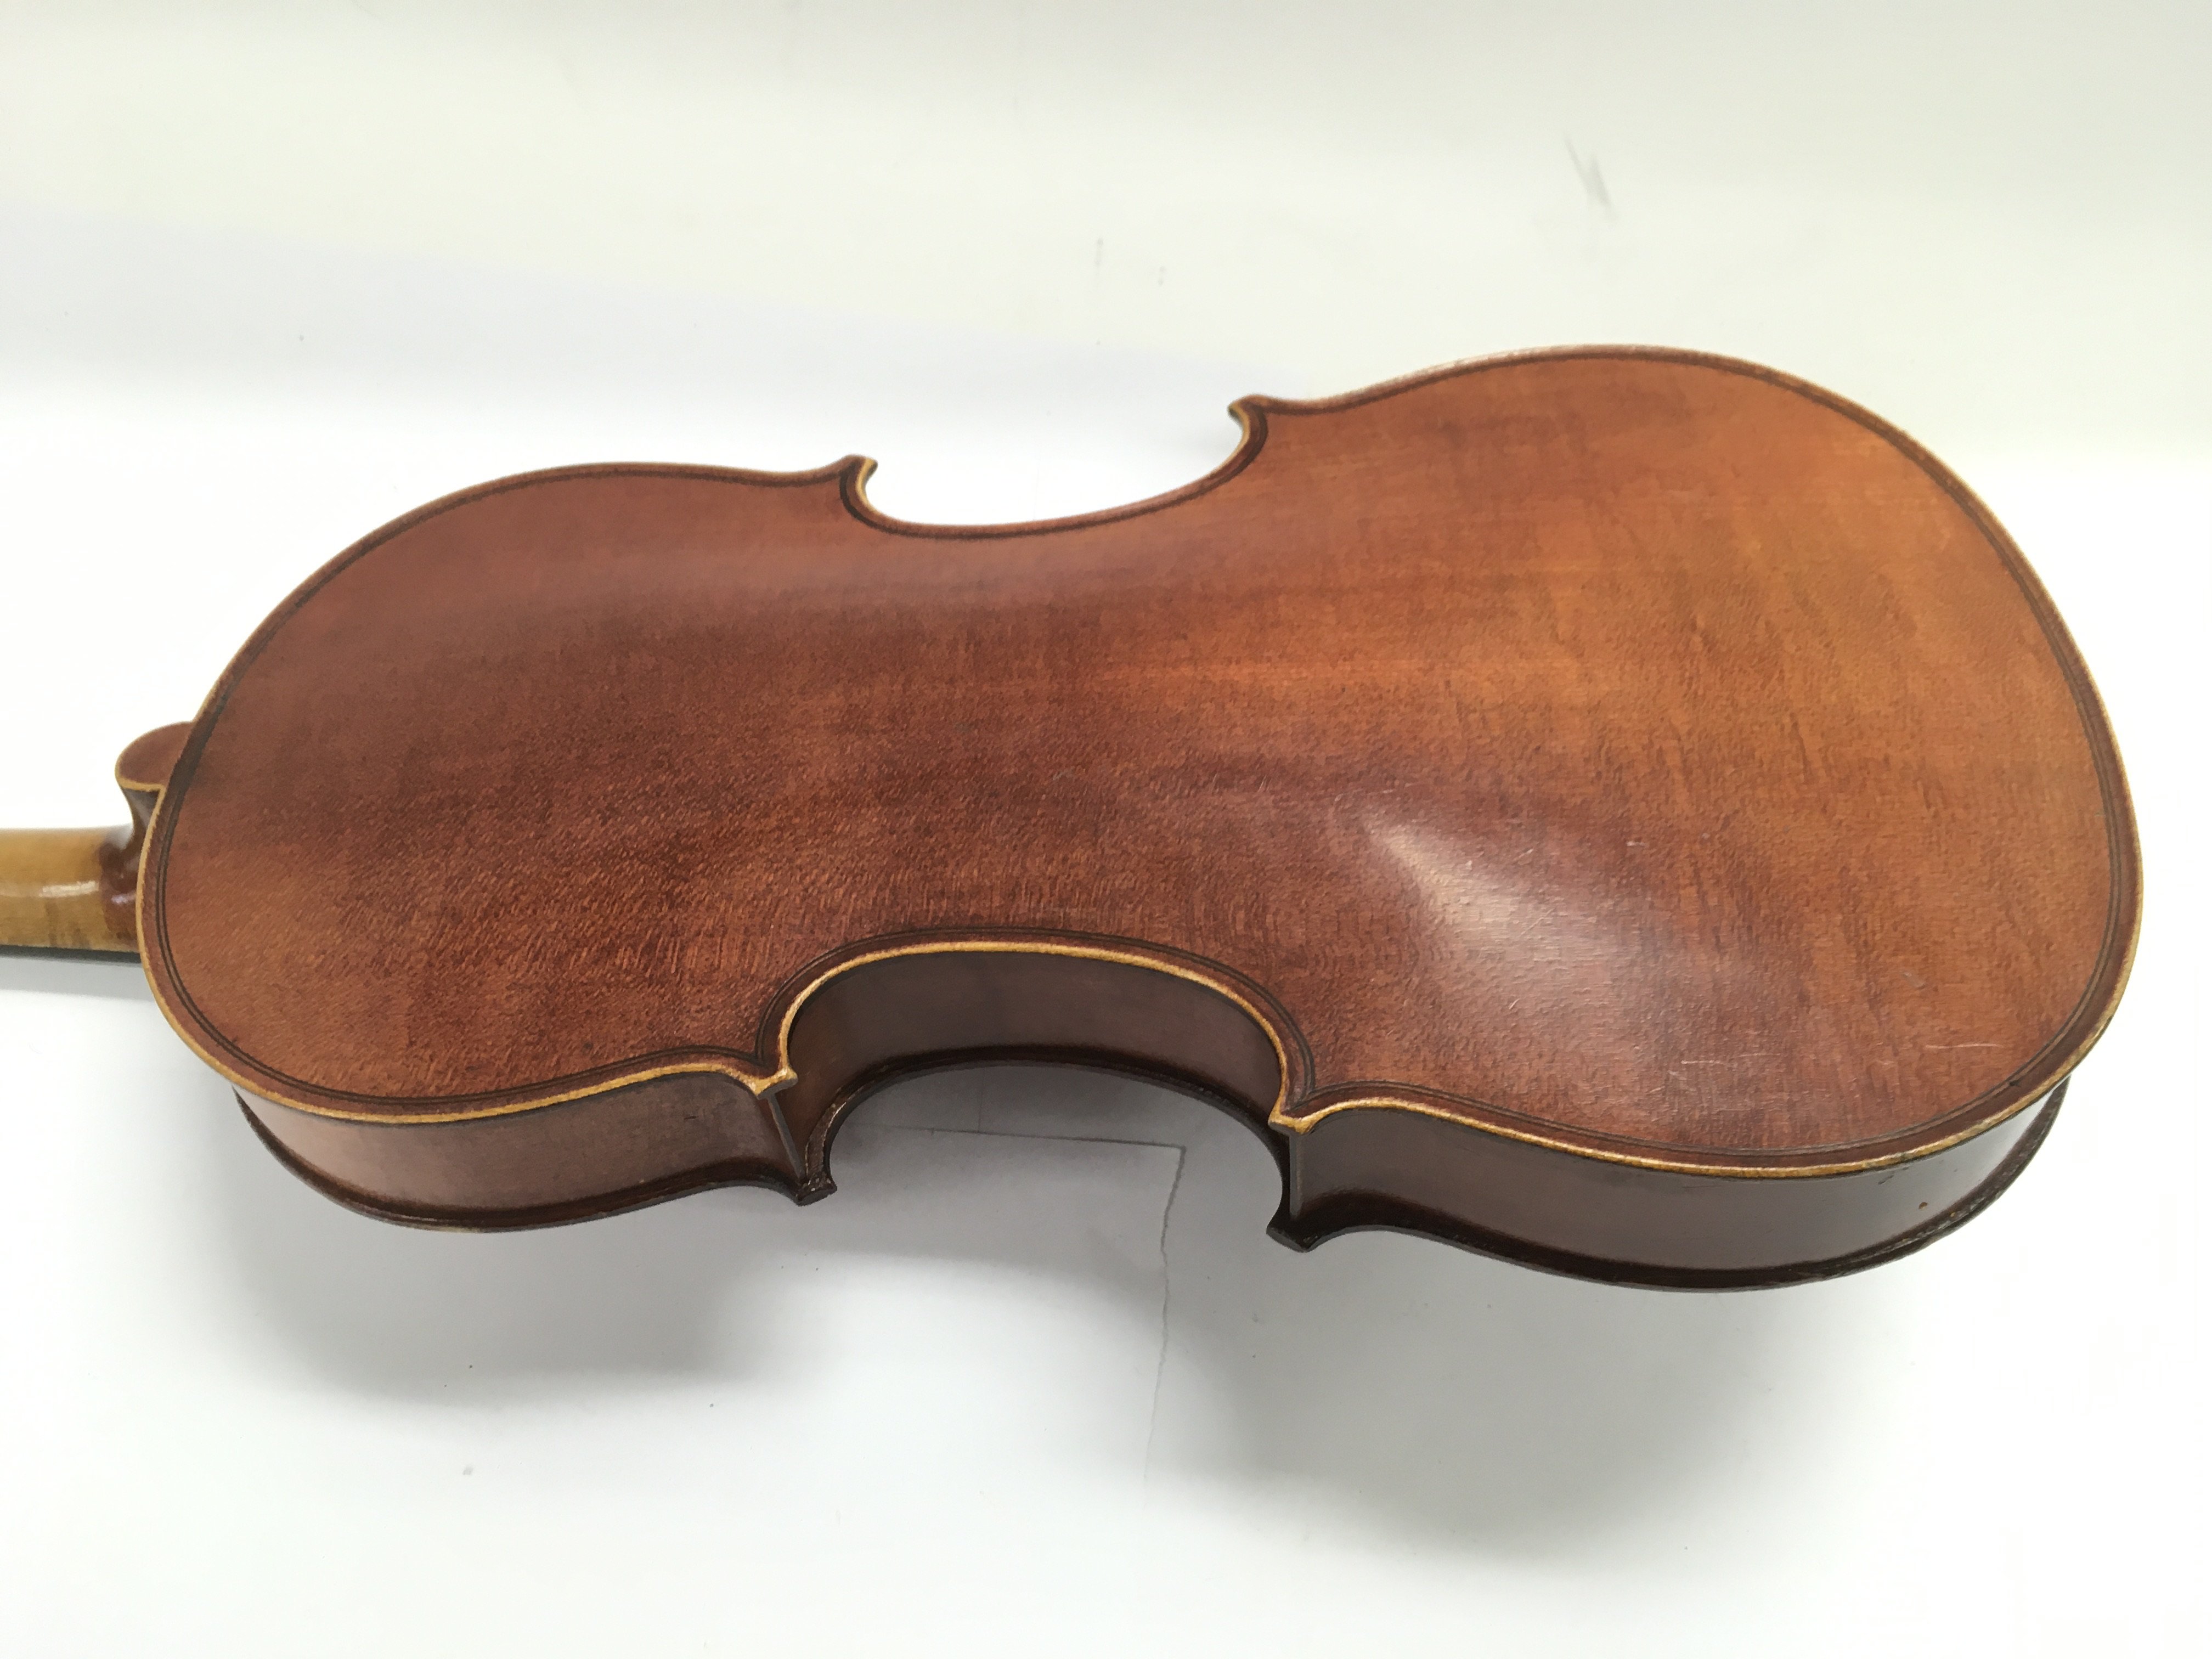 A circa 1920 Thibouville Lamp cased violin with bow. - Image 7 of 8